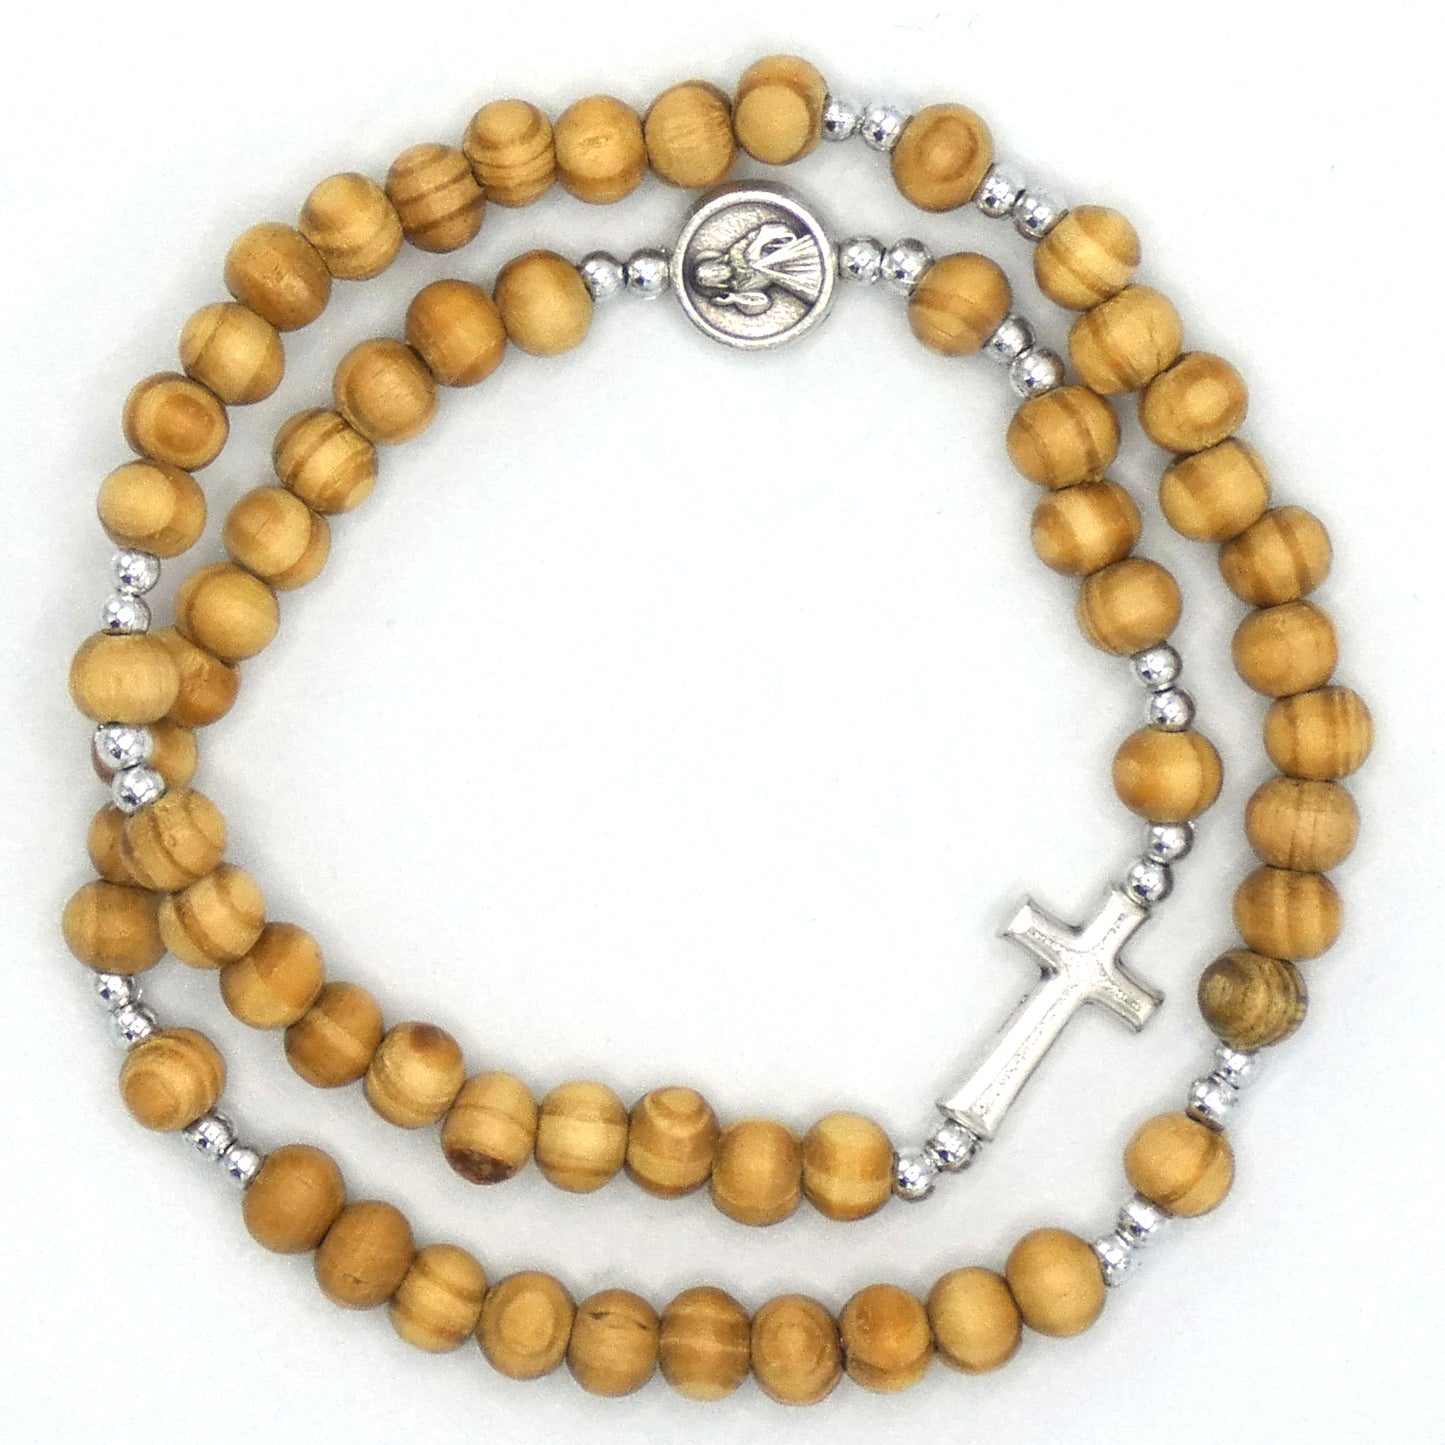 Wooden Wrap Rosary Bracelet of Assorted Colors